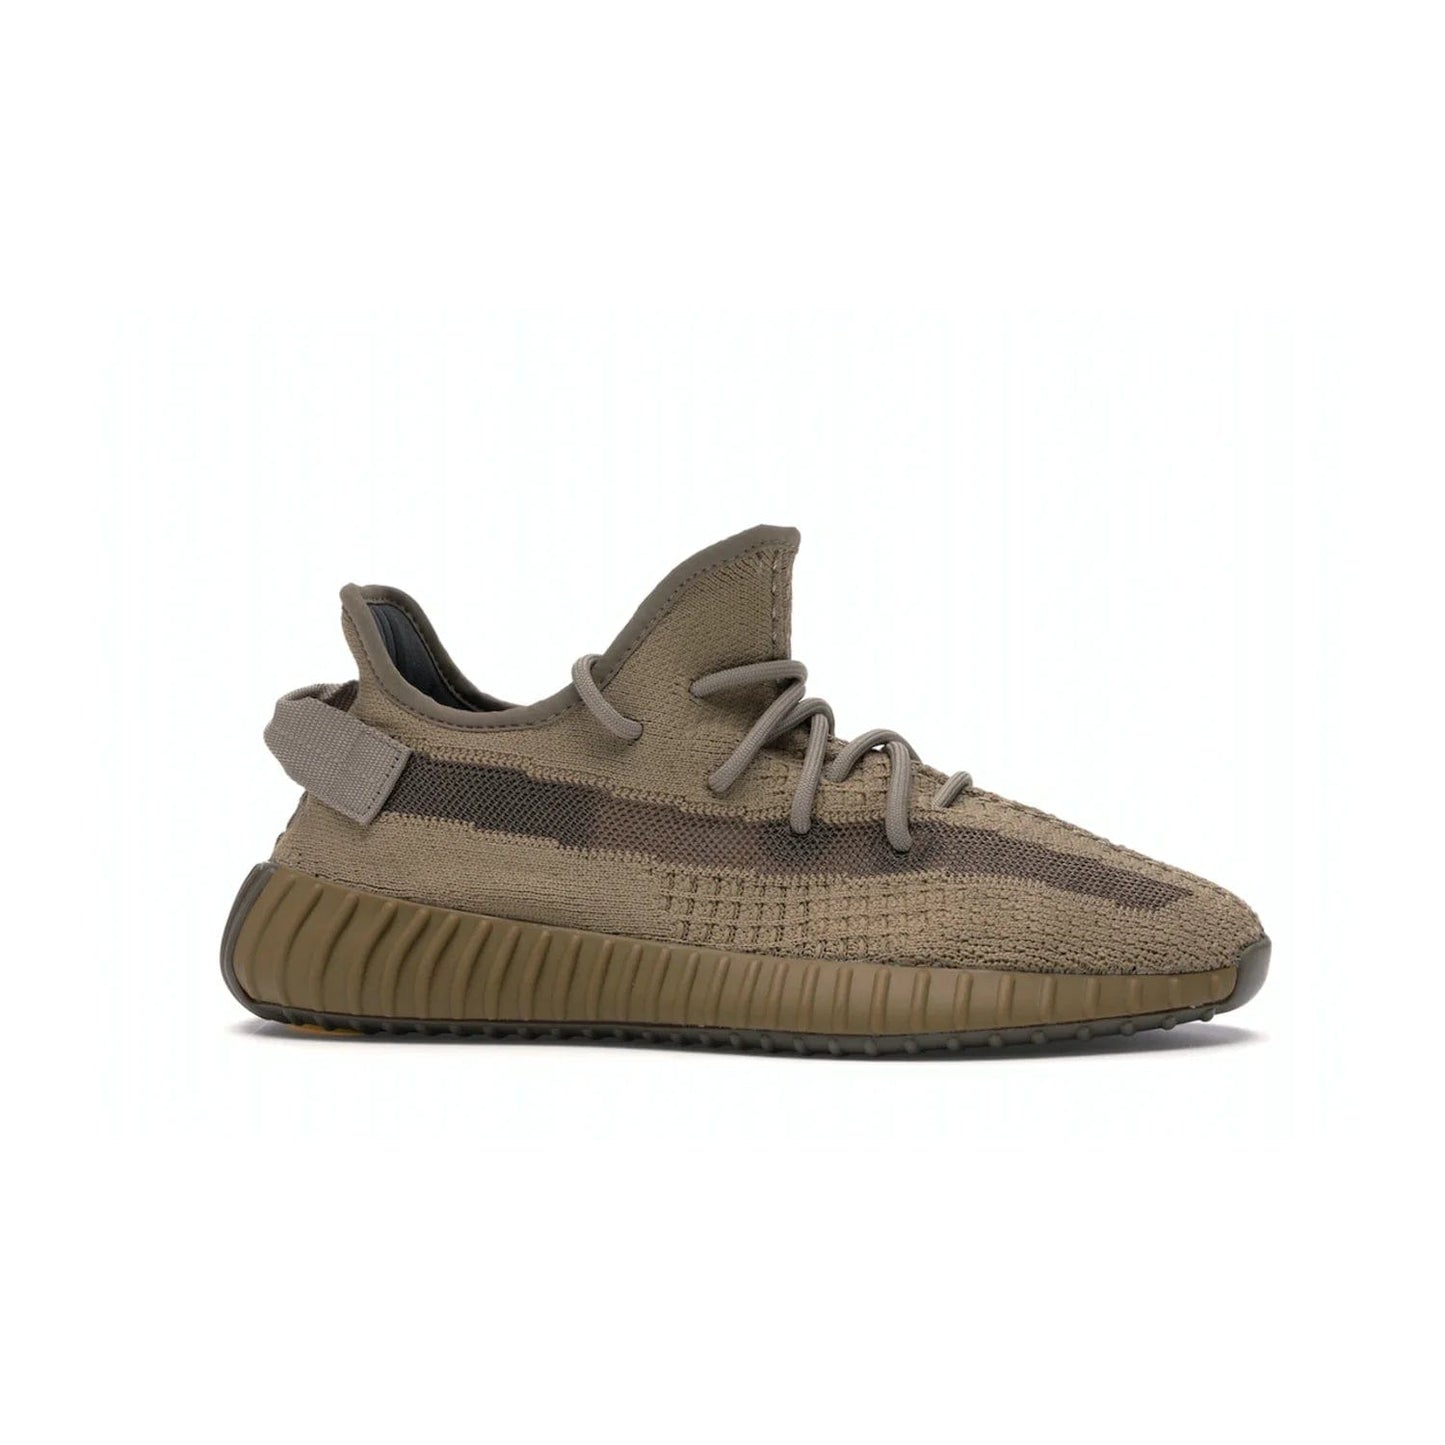 adidas Yeezy Boost 350 V2 Earth - Image 2 - Only at www.BallersClubKickz.com - Abstract style with the adidas Yeezy Boost 350 V2 Earth. Crafted with mud Primeknit upper, mud Boost and interior, and a translucent side stripe. Regional exclusive in Earth/Earth/Earth colorway, these fashionable sneakers released in February 2020. Showcase your style with the Yeezy 350 V2 Earth.